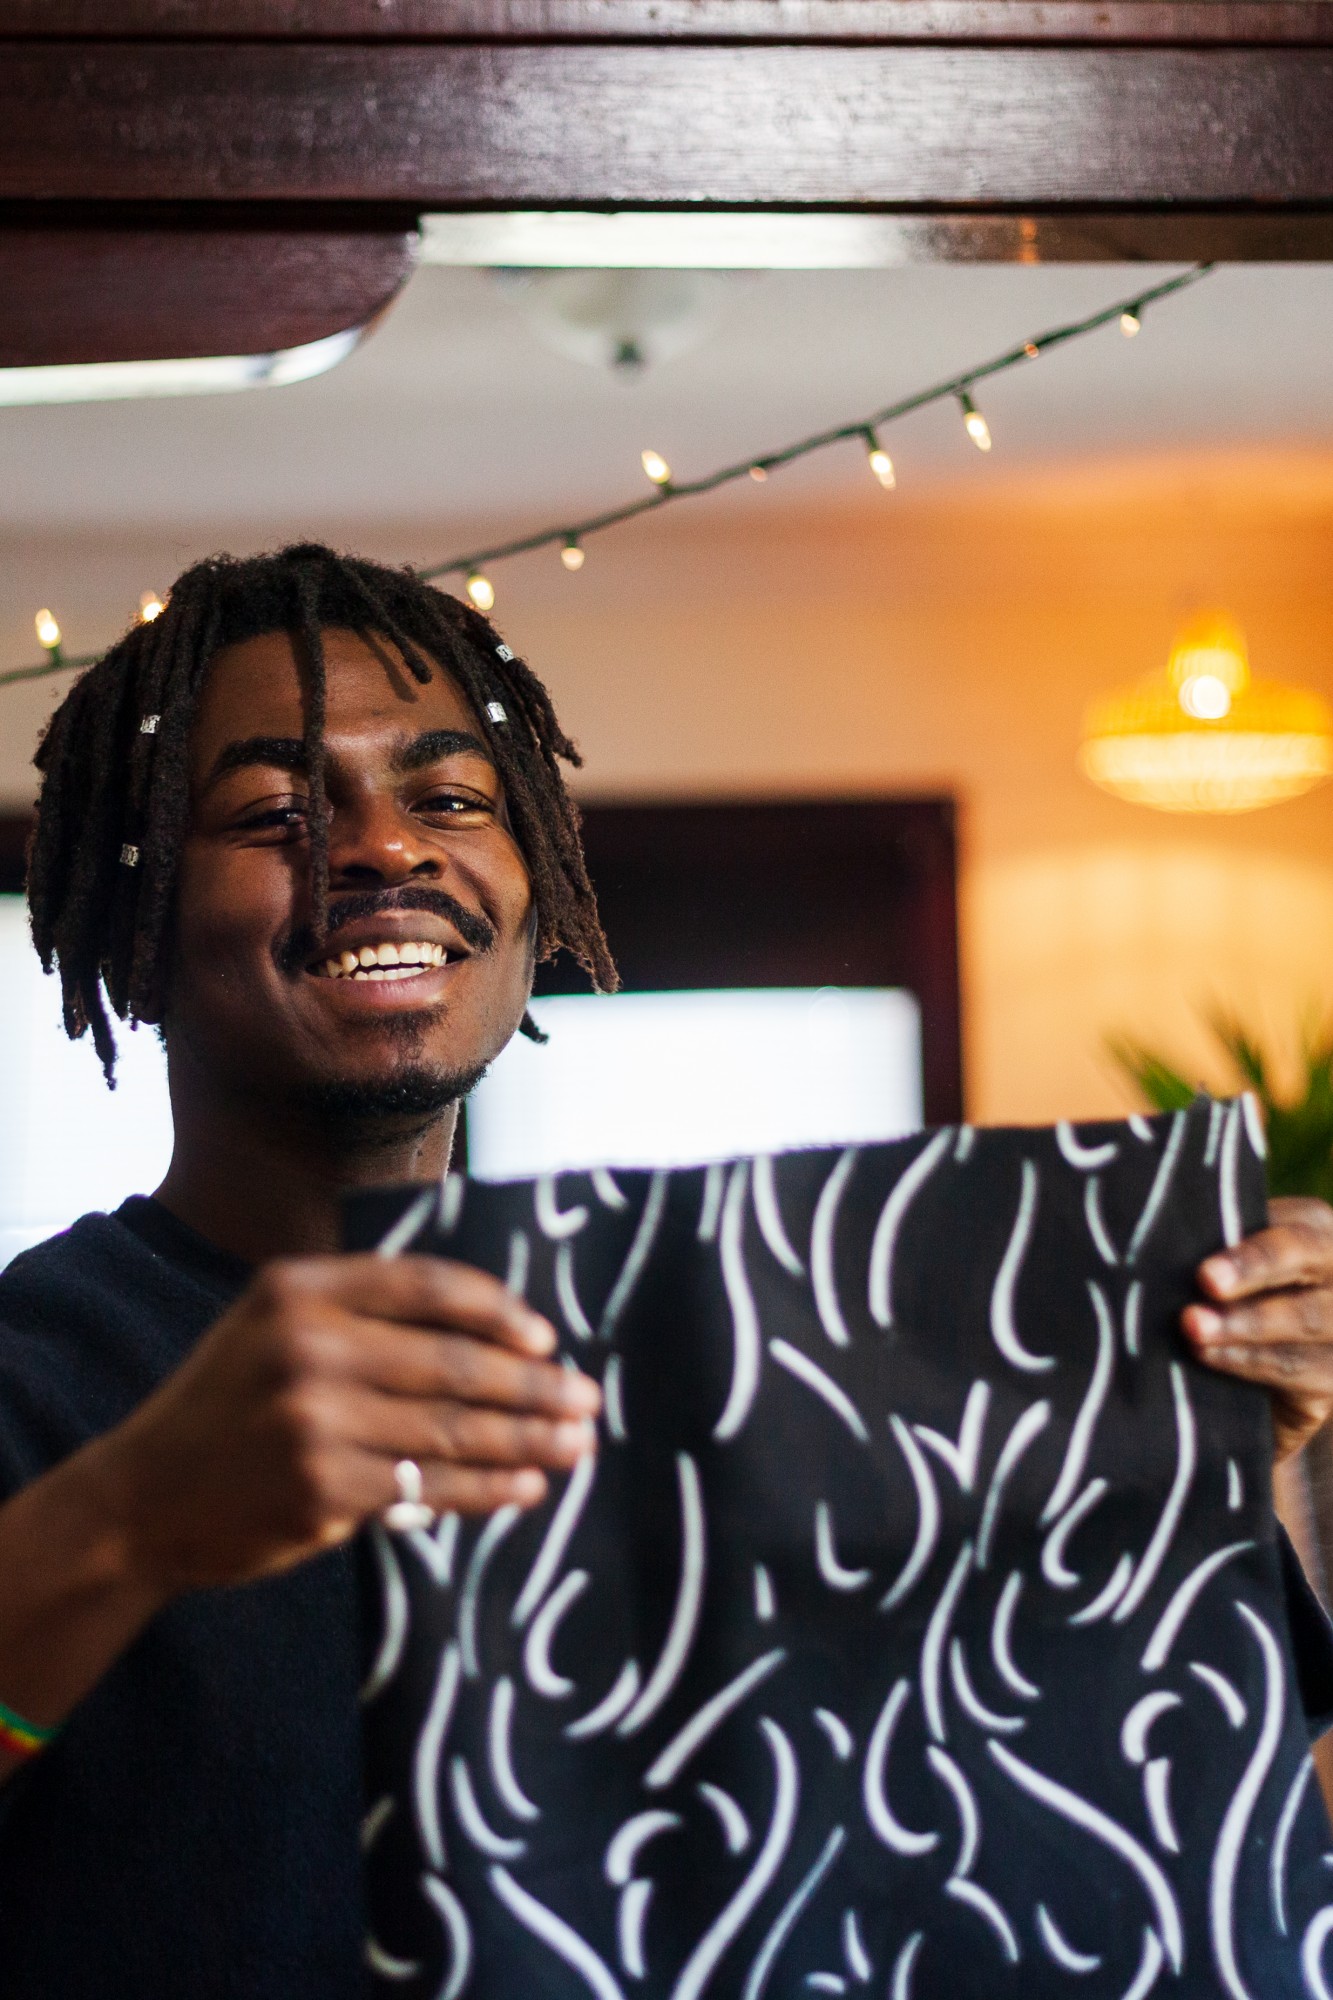 Denimani gathers fabric to begin working on a custom piece in his apartment studio in northwest Minneapolis on Friday, Oct. 25. Denimani sees clothing as an important means of expressing personality which is apparent in the uniqueness of his high quality, made-to-order apparel. 